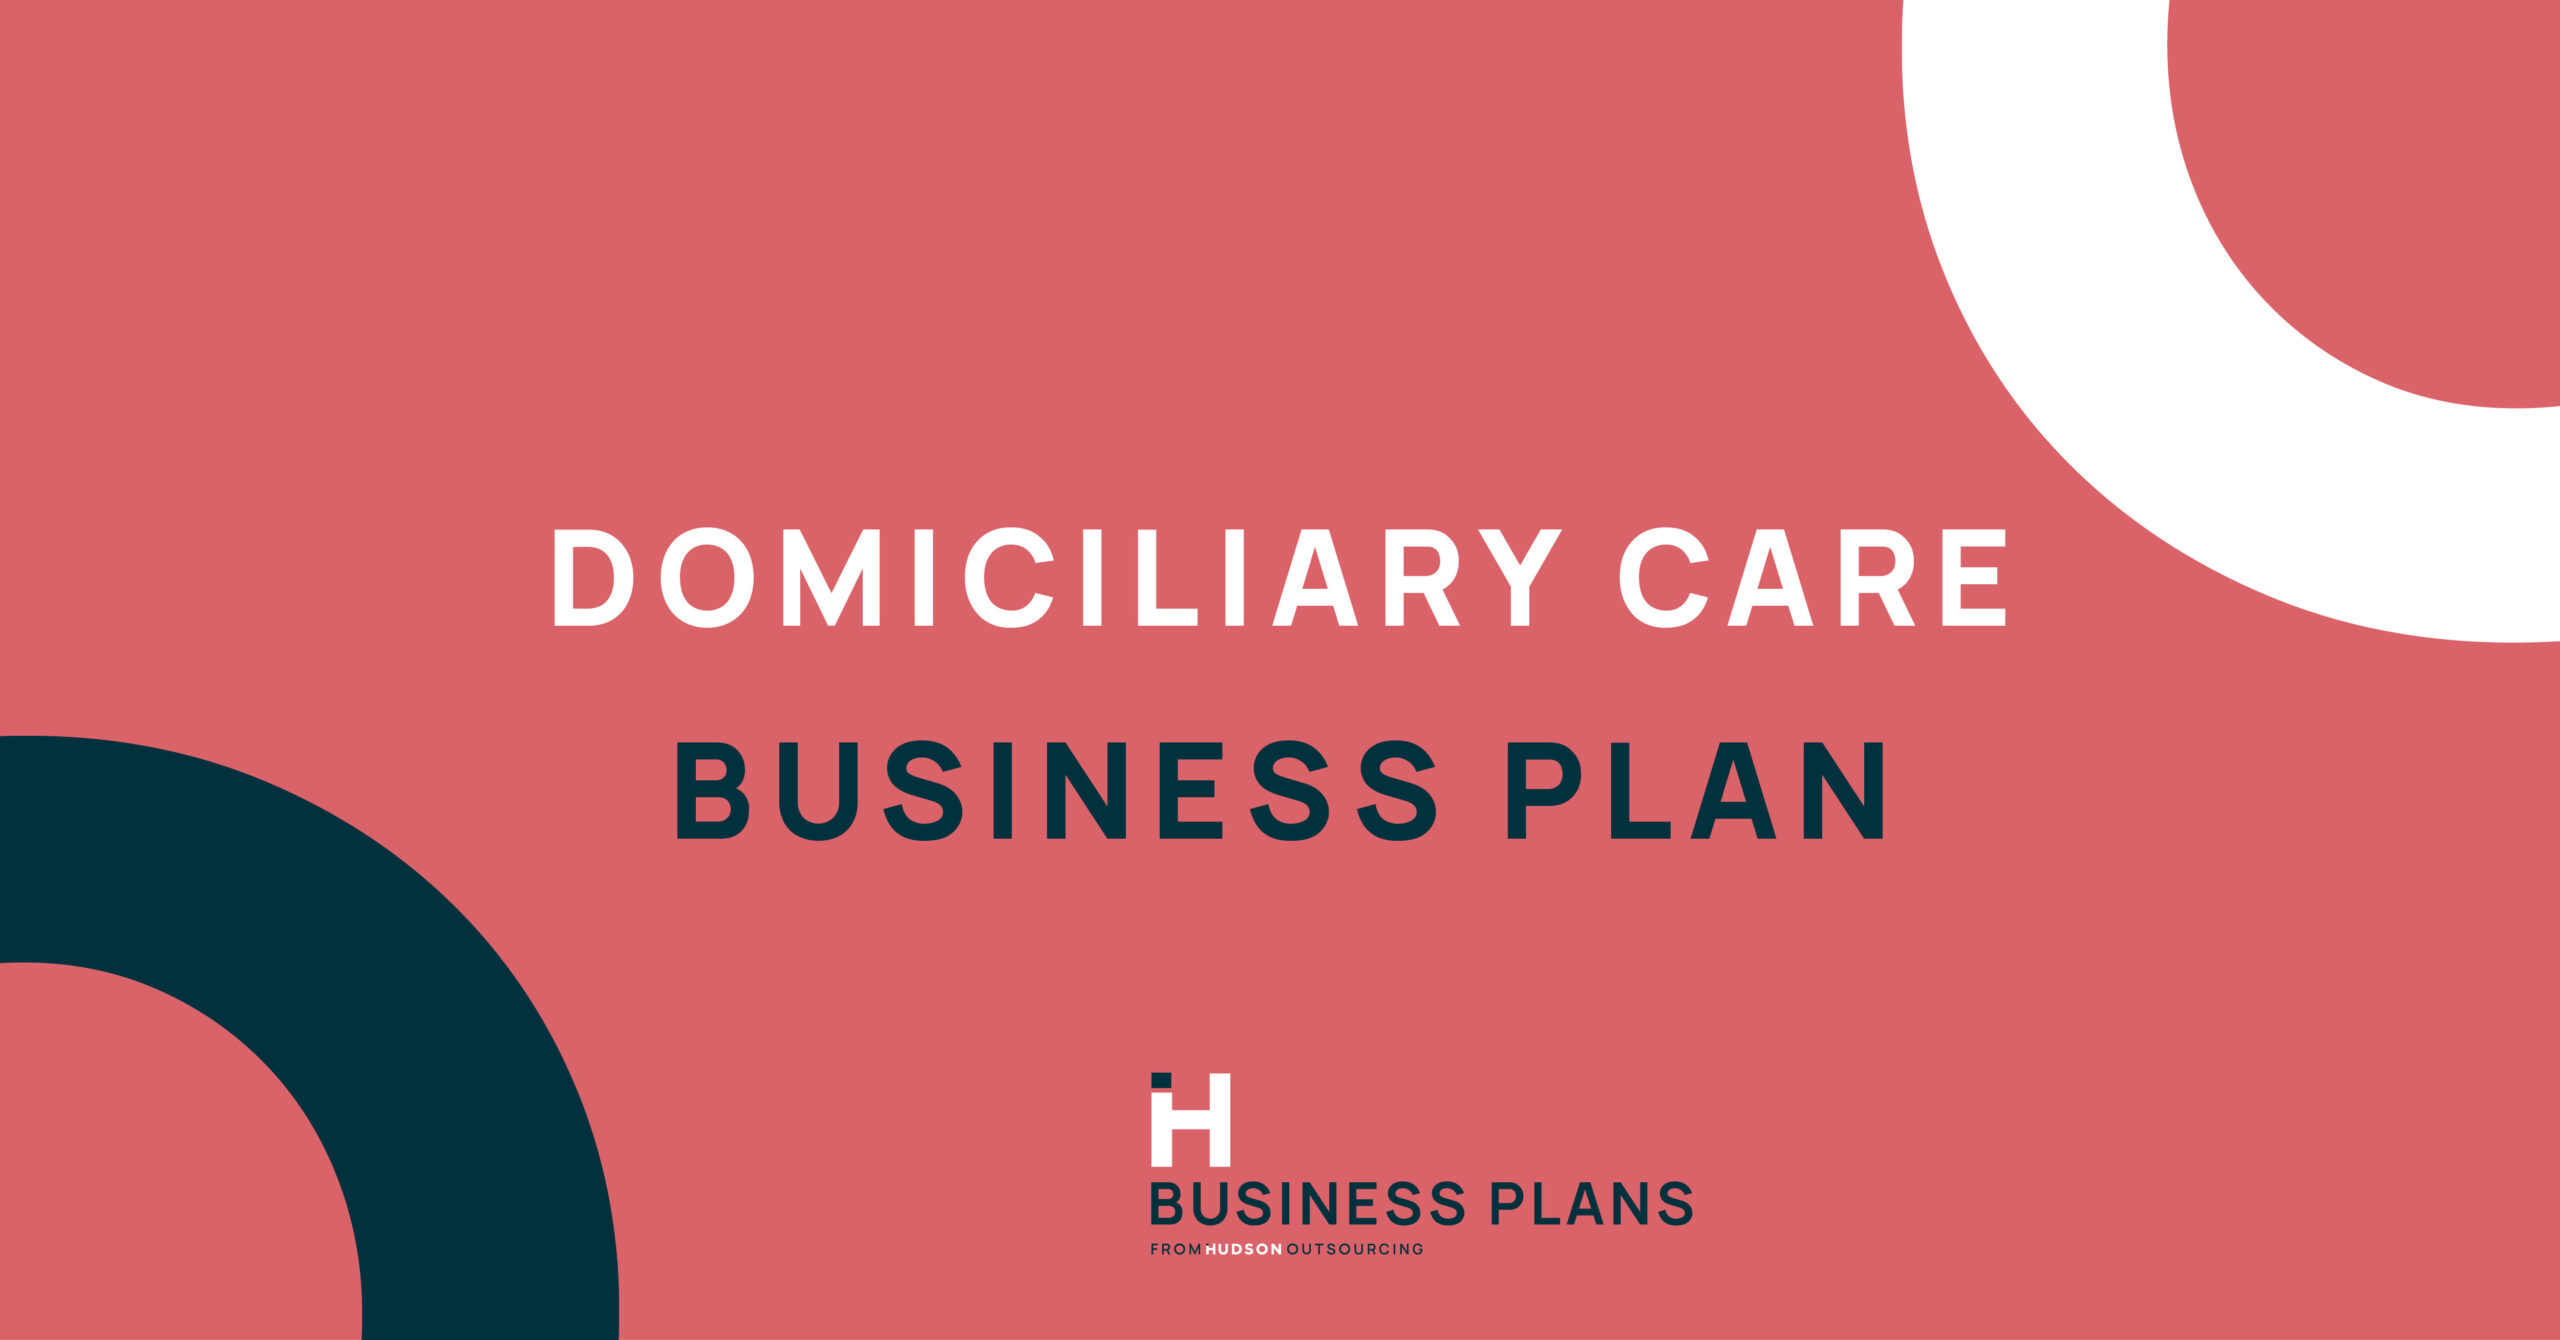 domiciliary care business plan uk